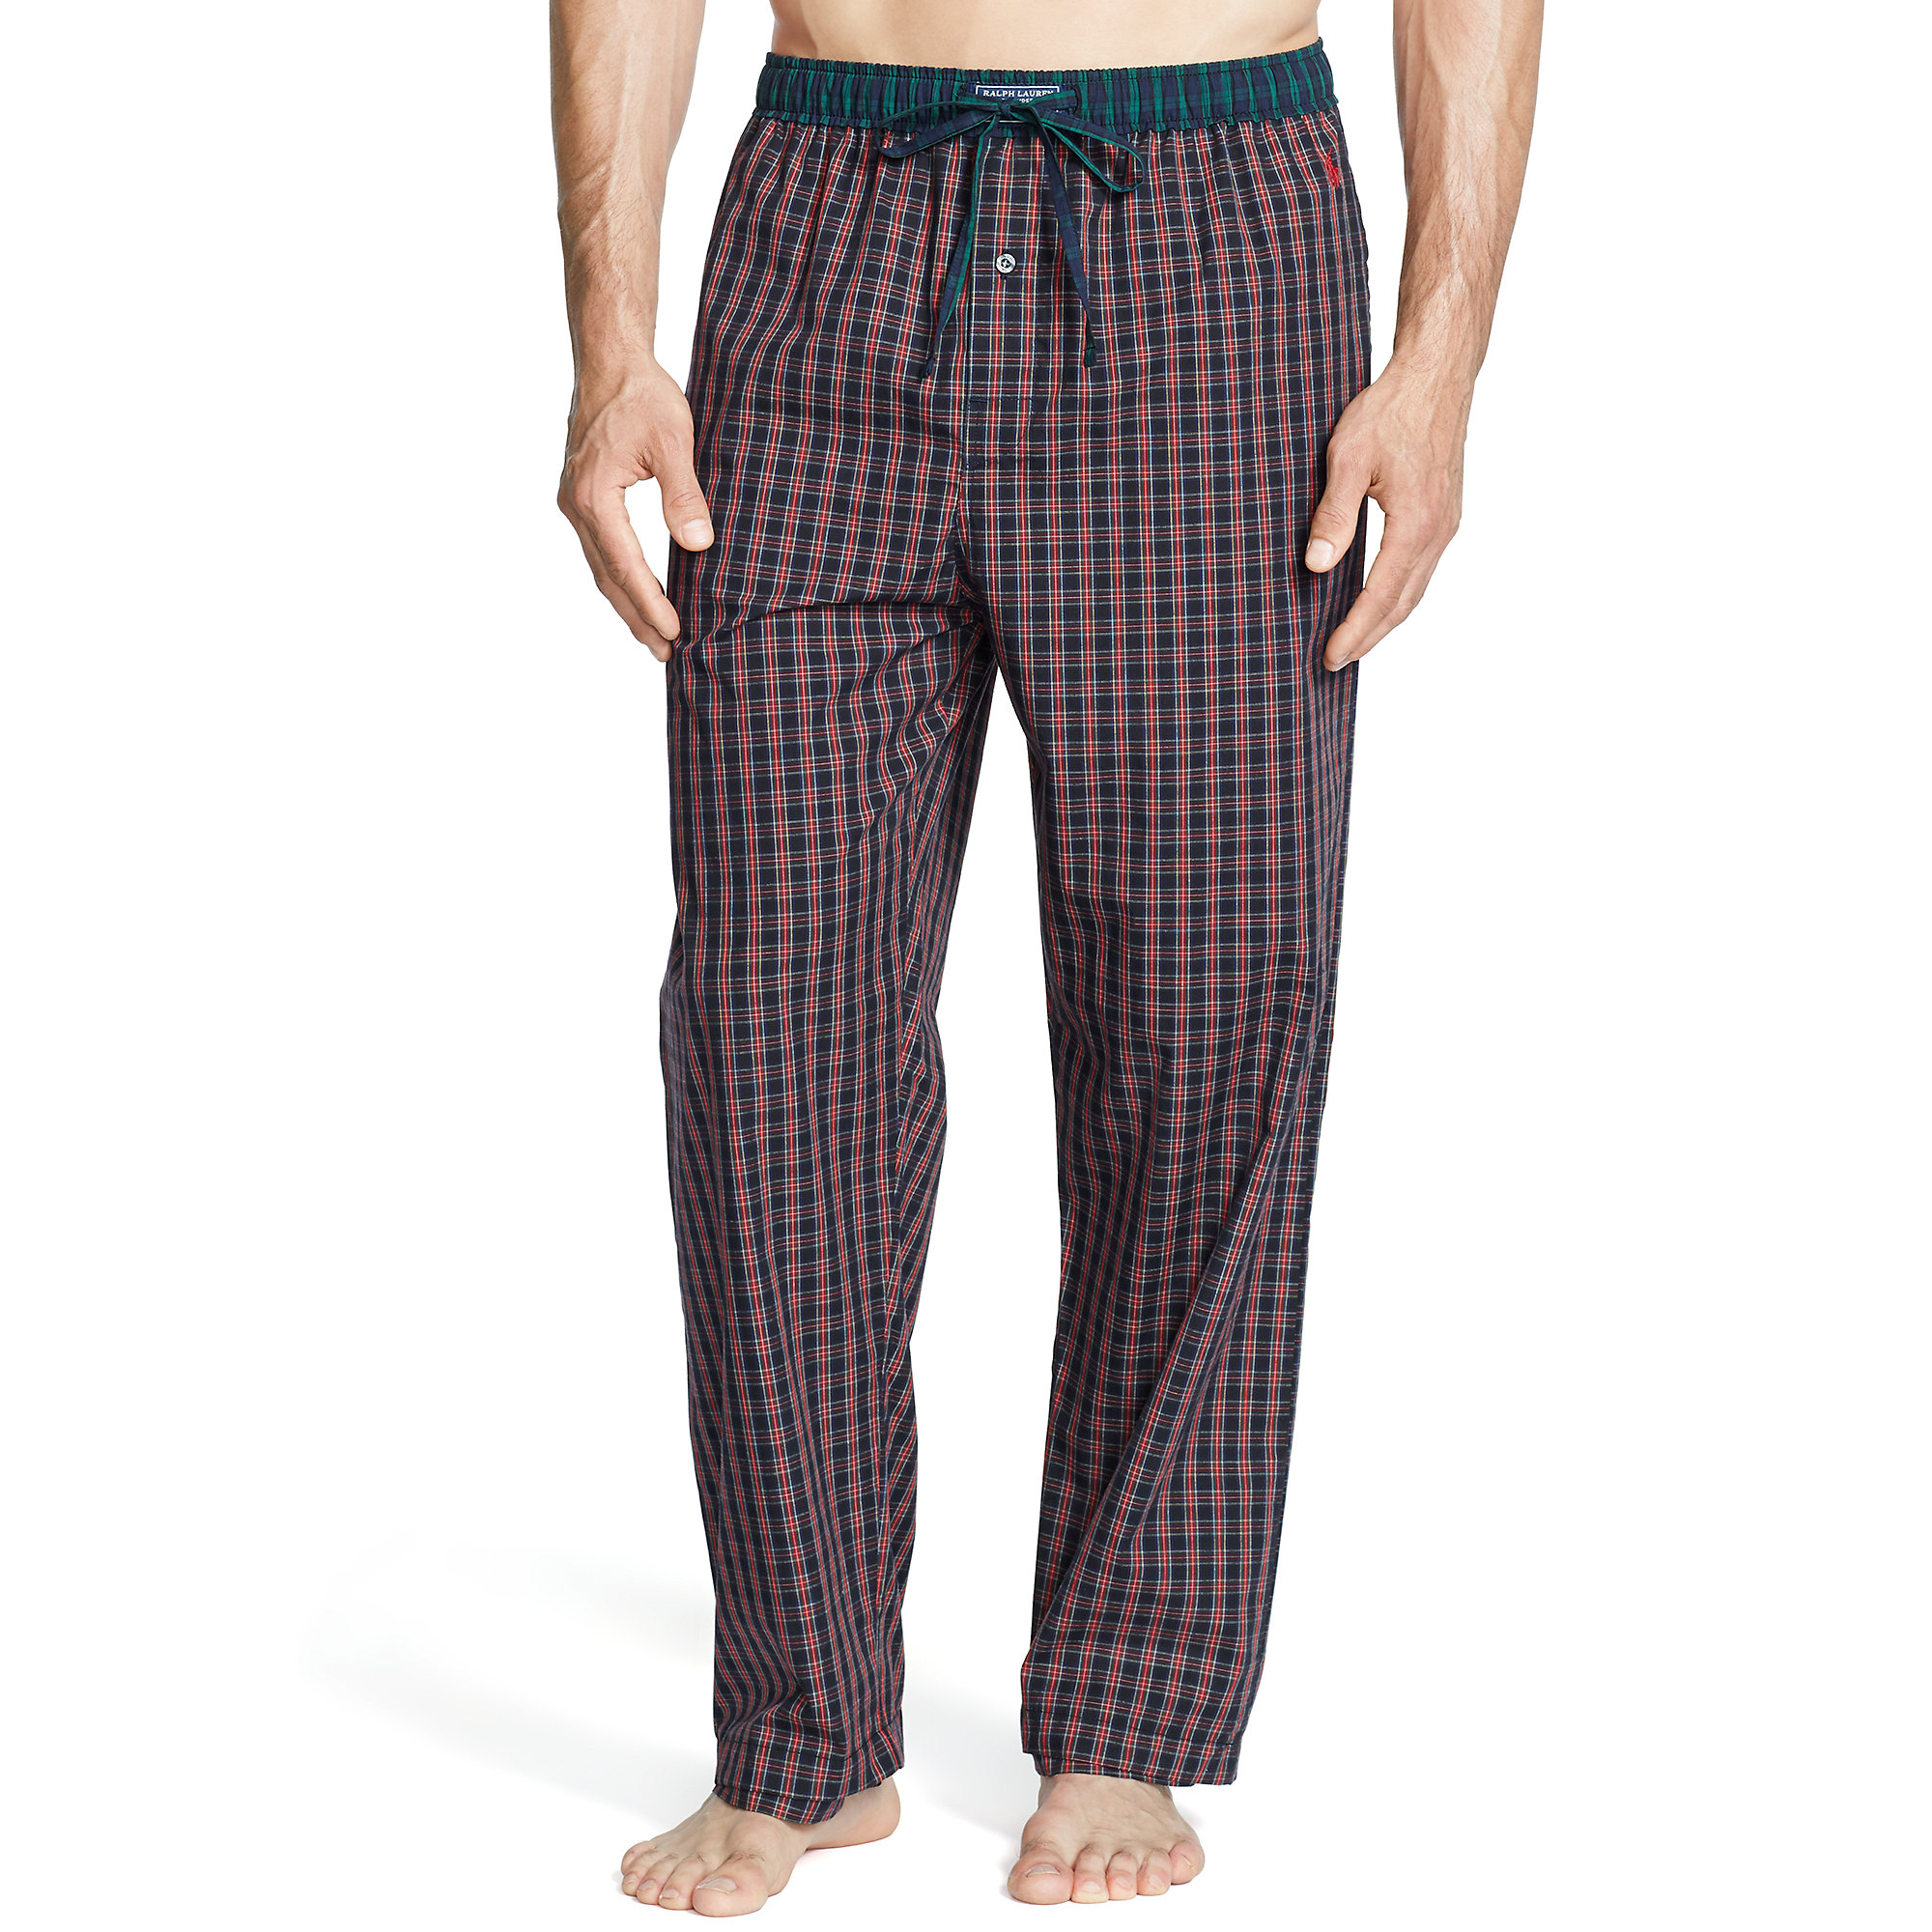 Lyst - Polo Ralph Lauren Plaid Cotton Pajama Pant in Red for Men